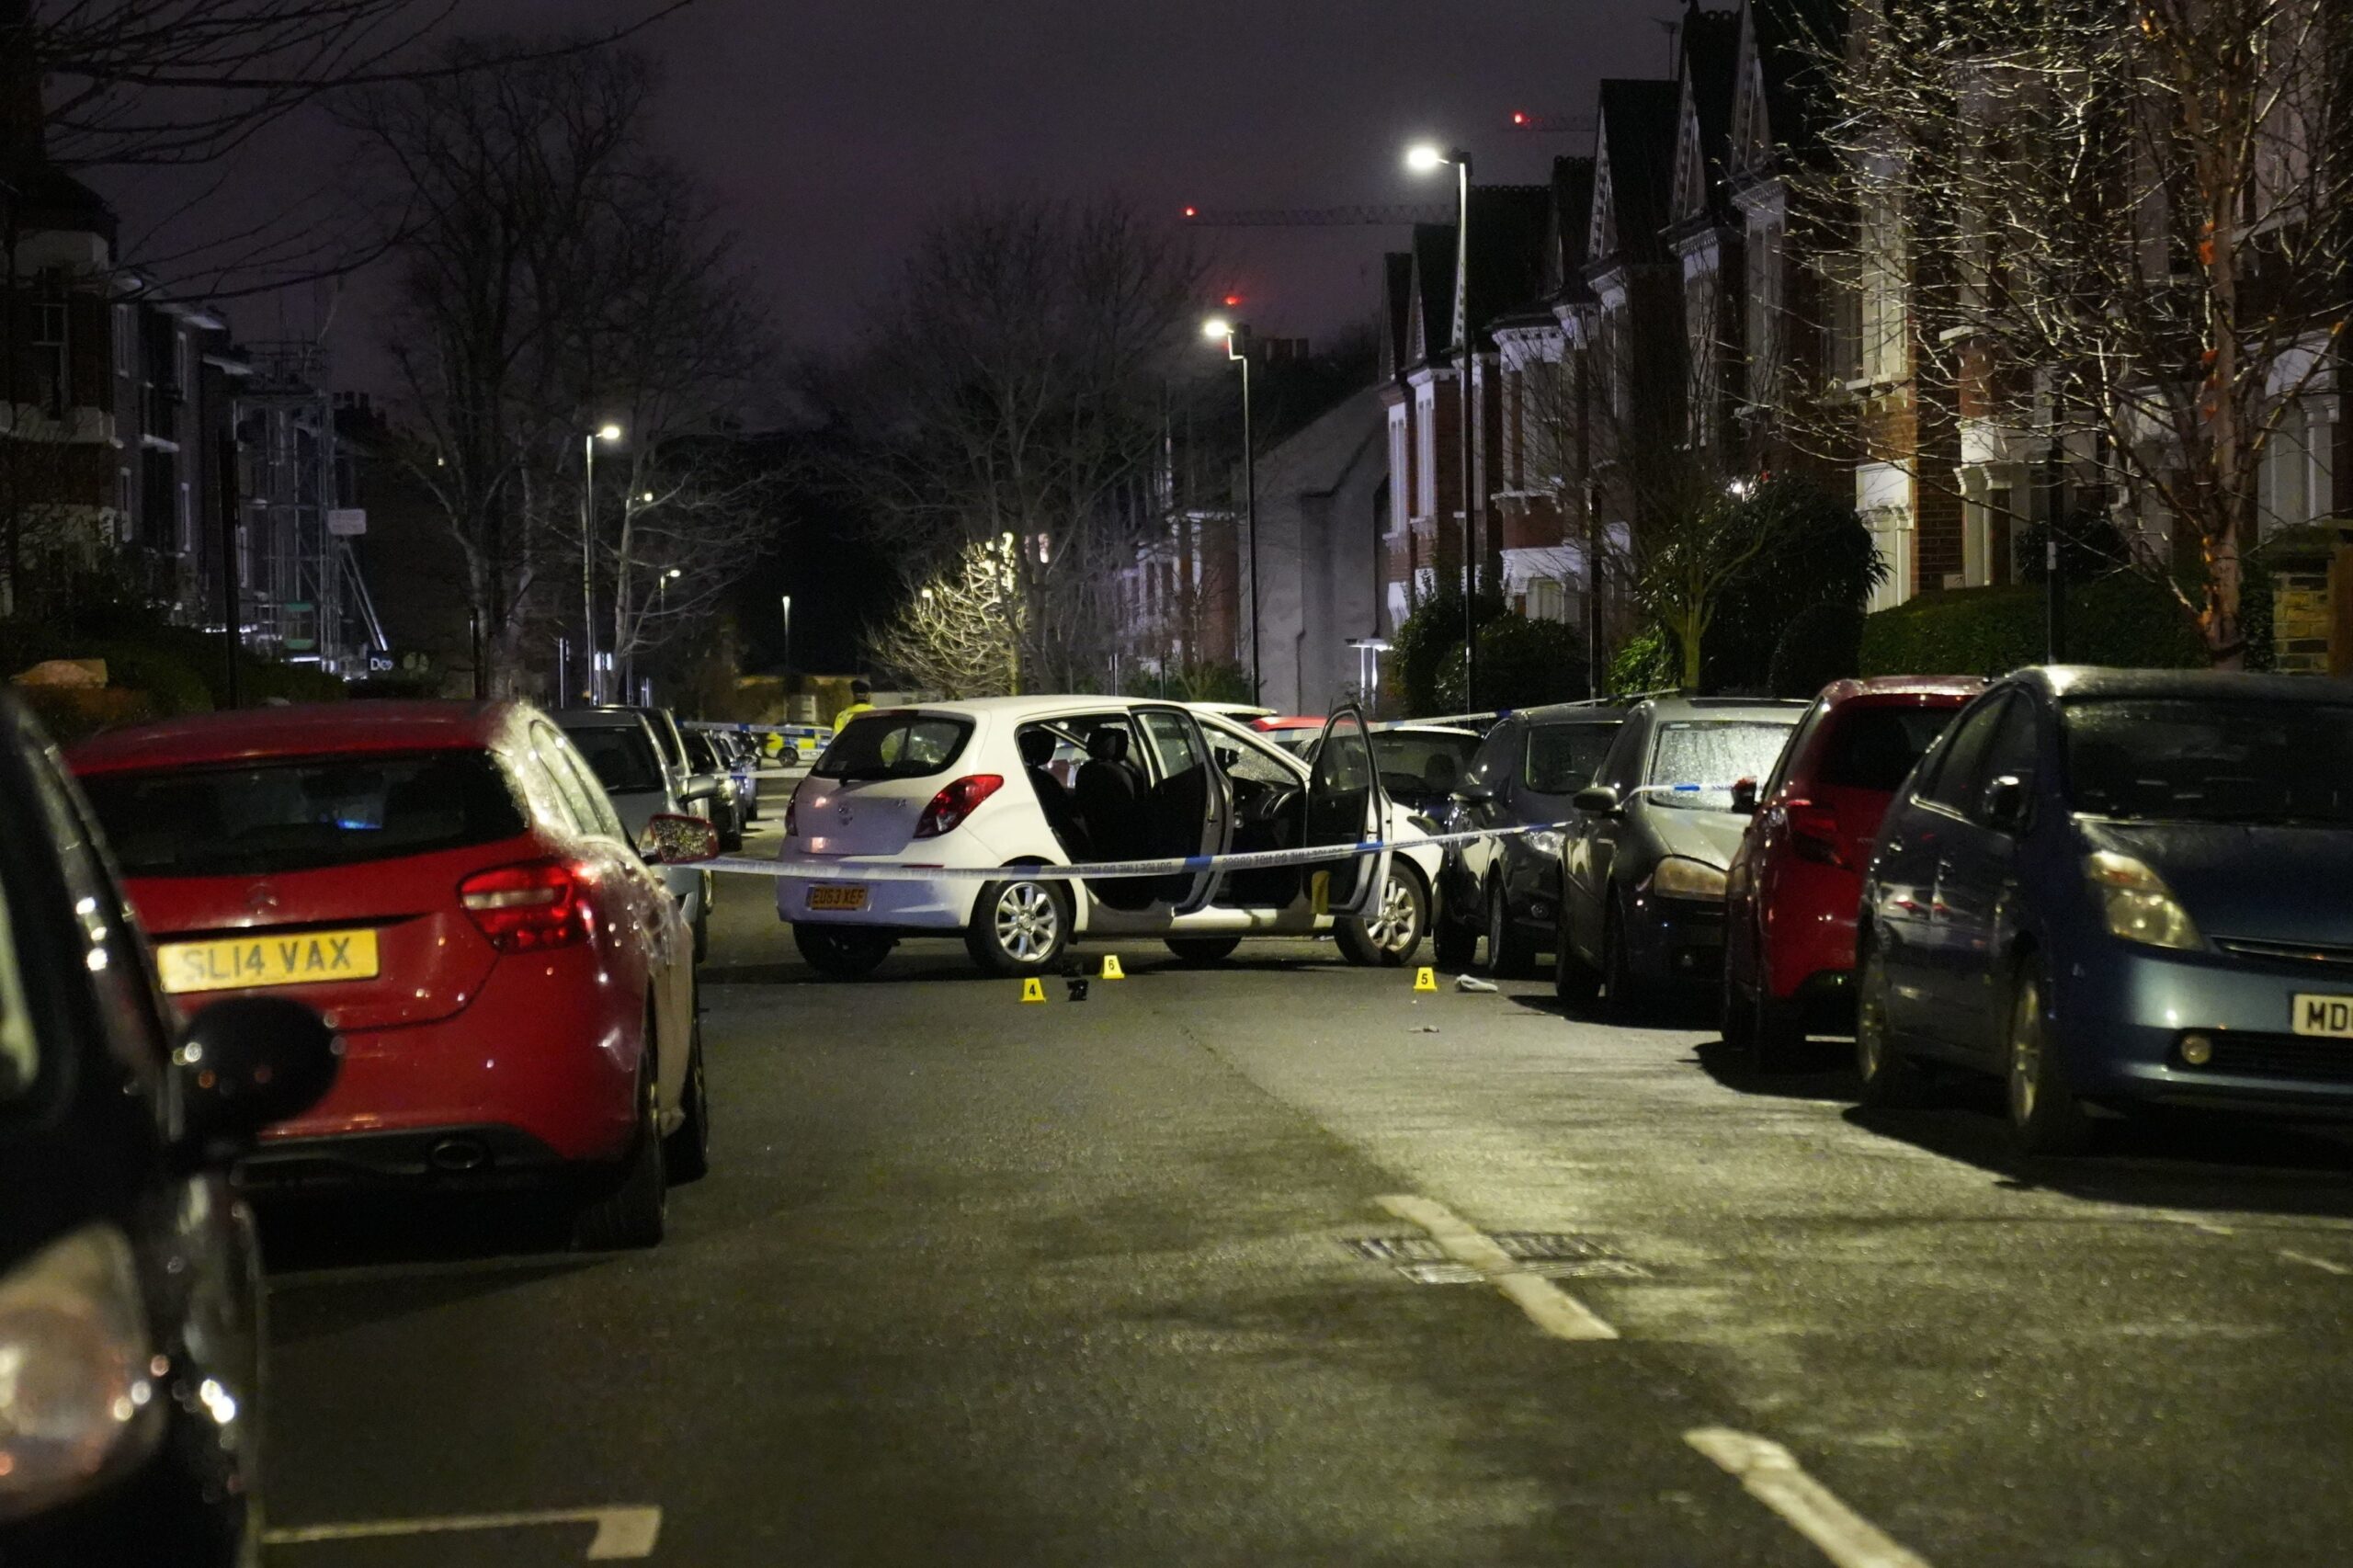 Latest updates: In Clapham, a woman and children were attacked with a harmful chemical.